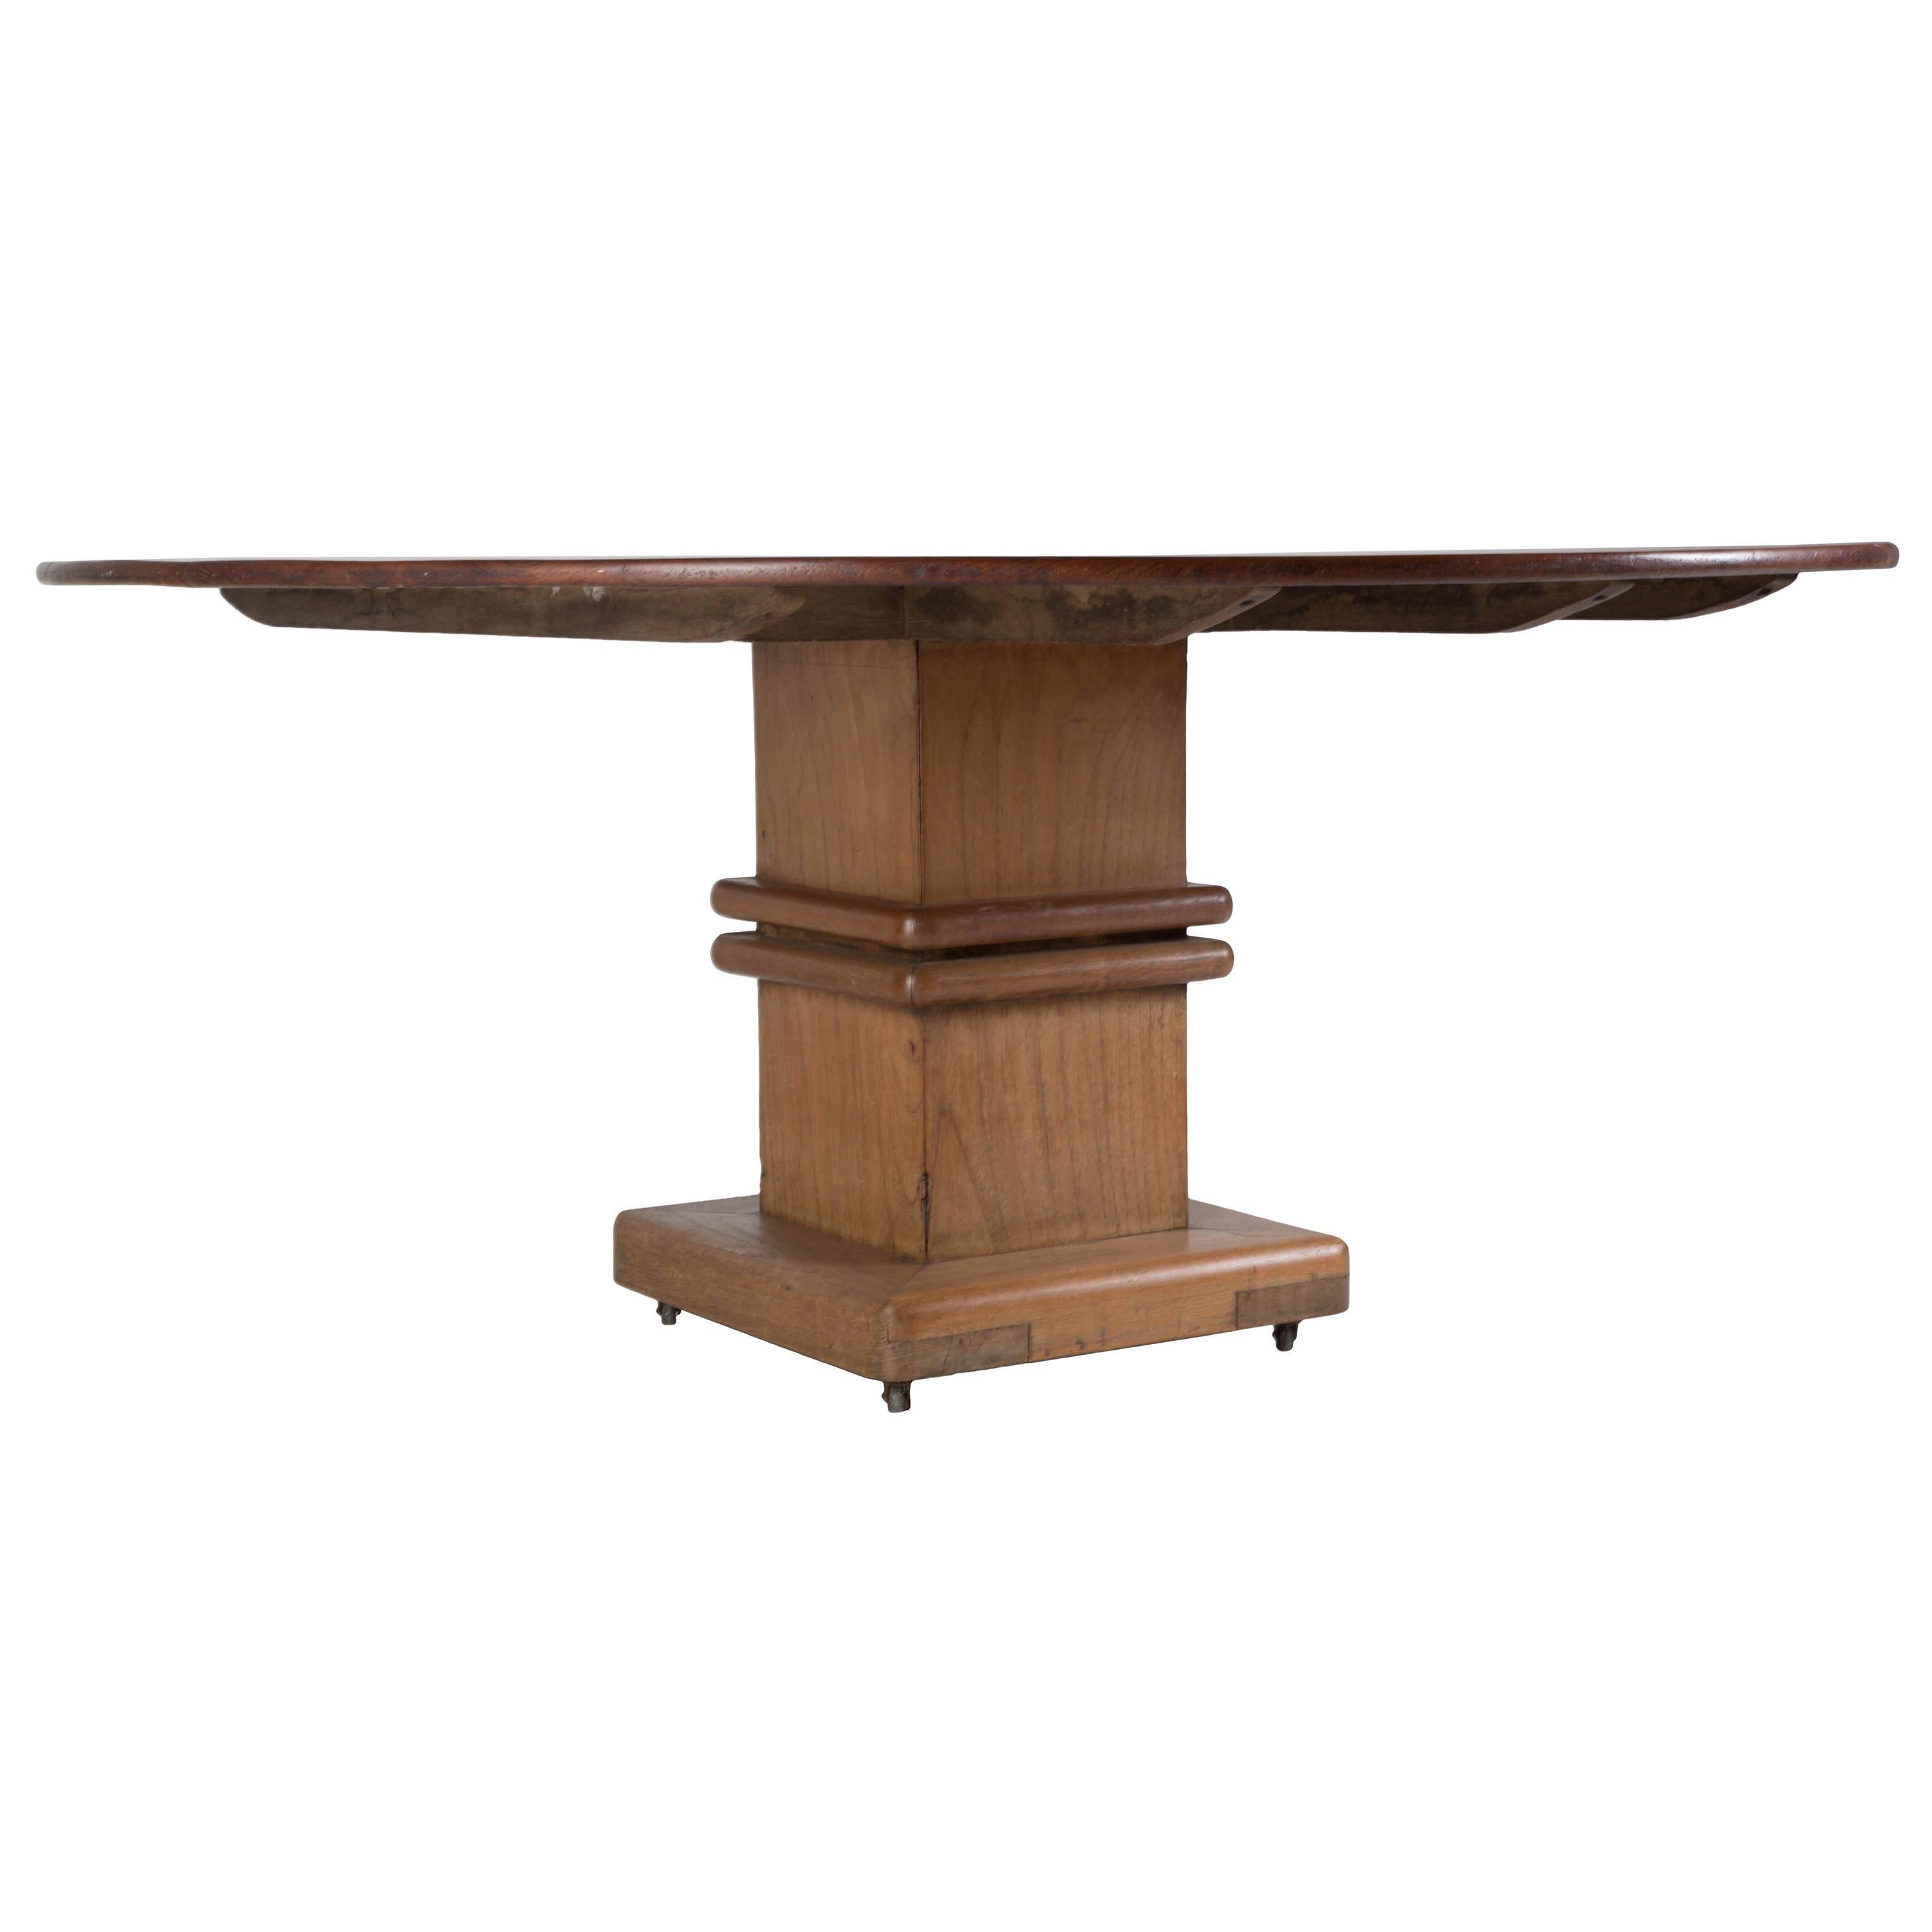 An Art Deco period Anglo Indian circular teak table on square column base.